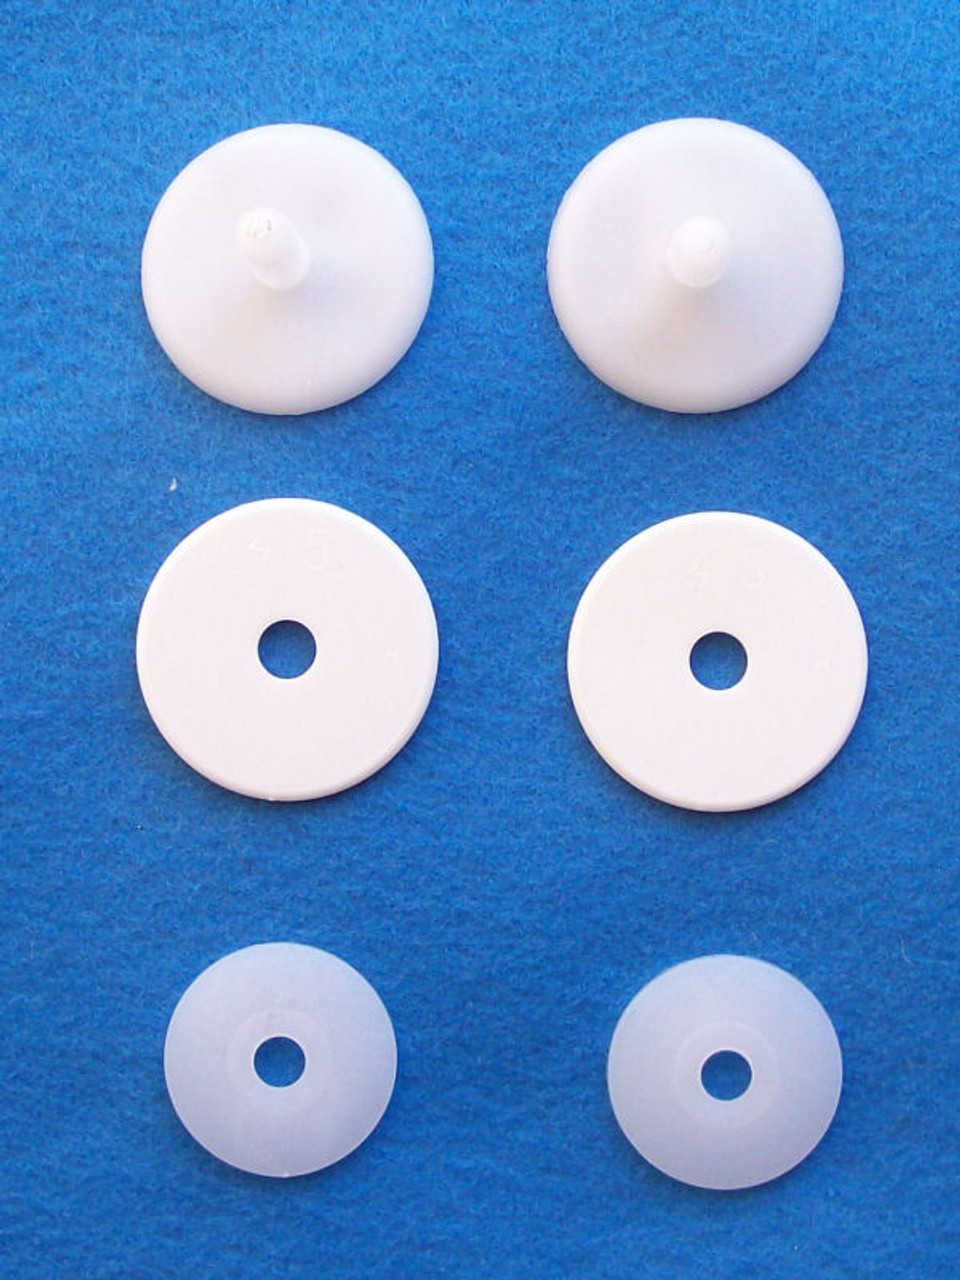  WHYHKJ 24PCS 20mm Doll Plastic Joints Doll Joints White Plastic  Animal Joints for Doll Making Limbs and Head Joints